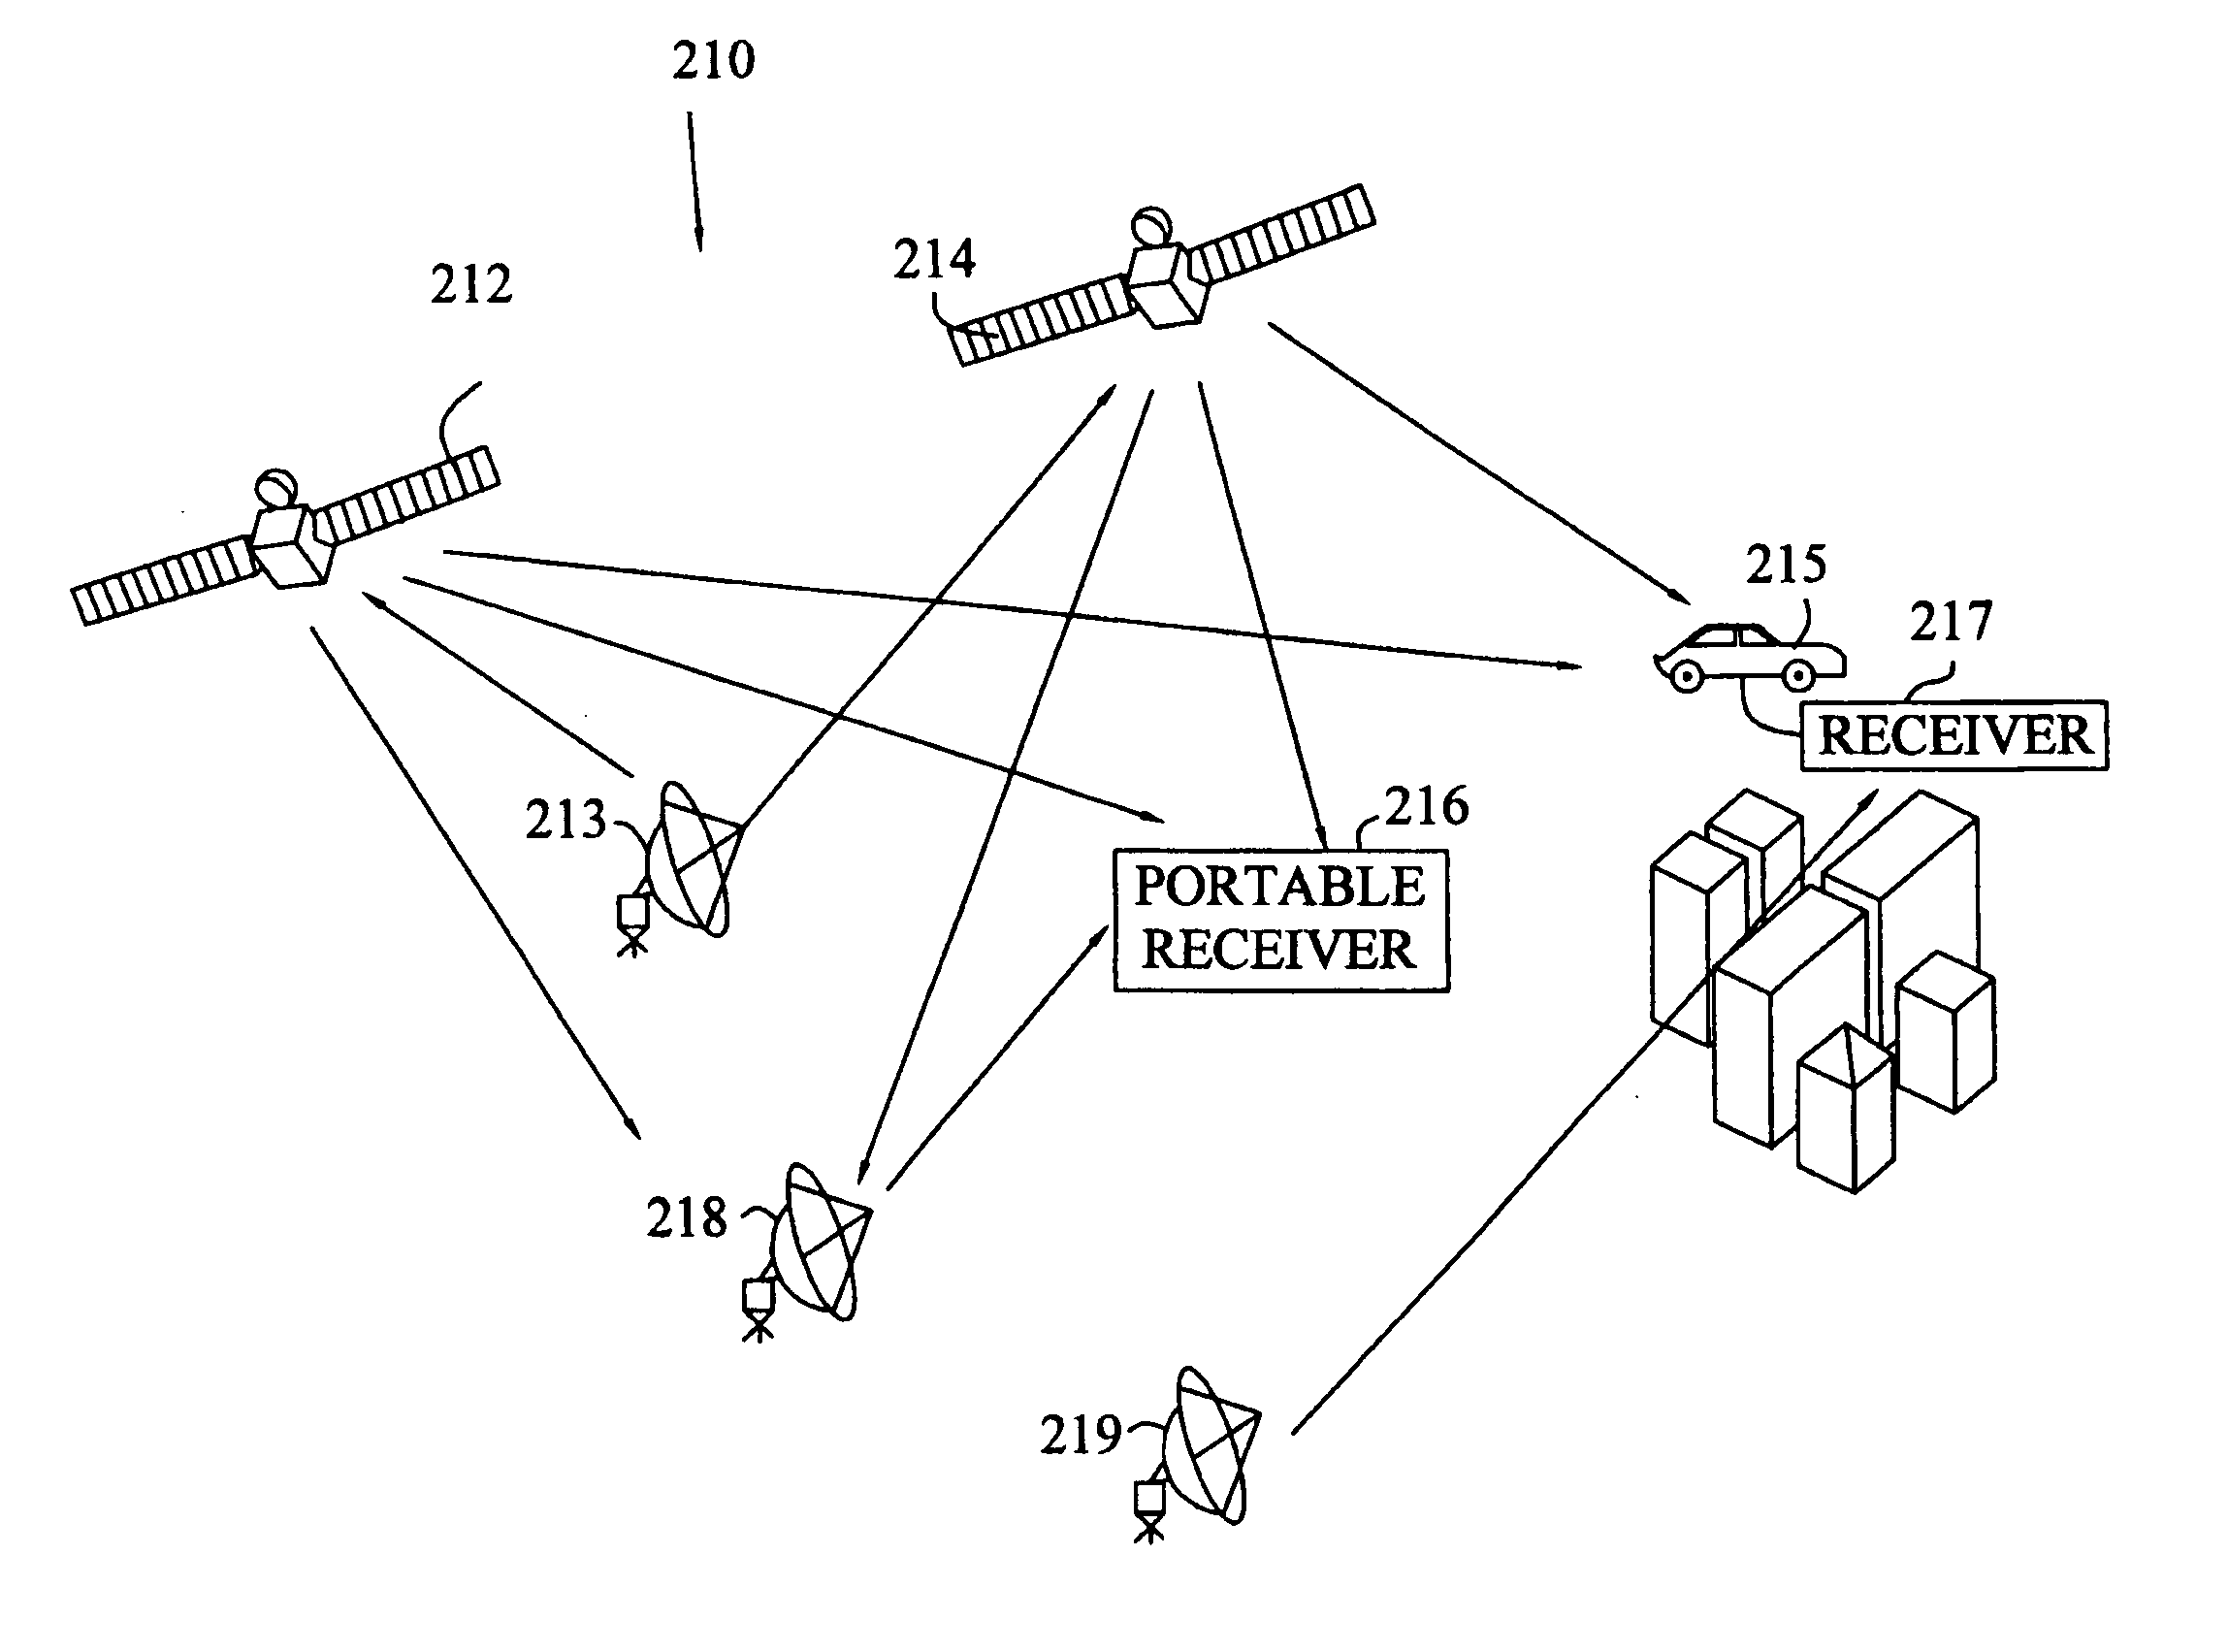 Method to minimize compatibility error in hierarchical modulation using variable phase